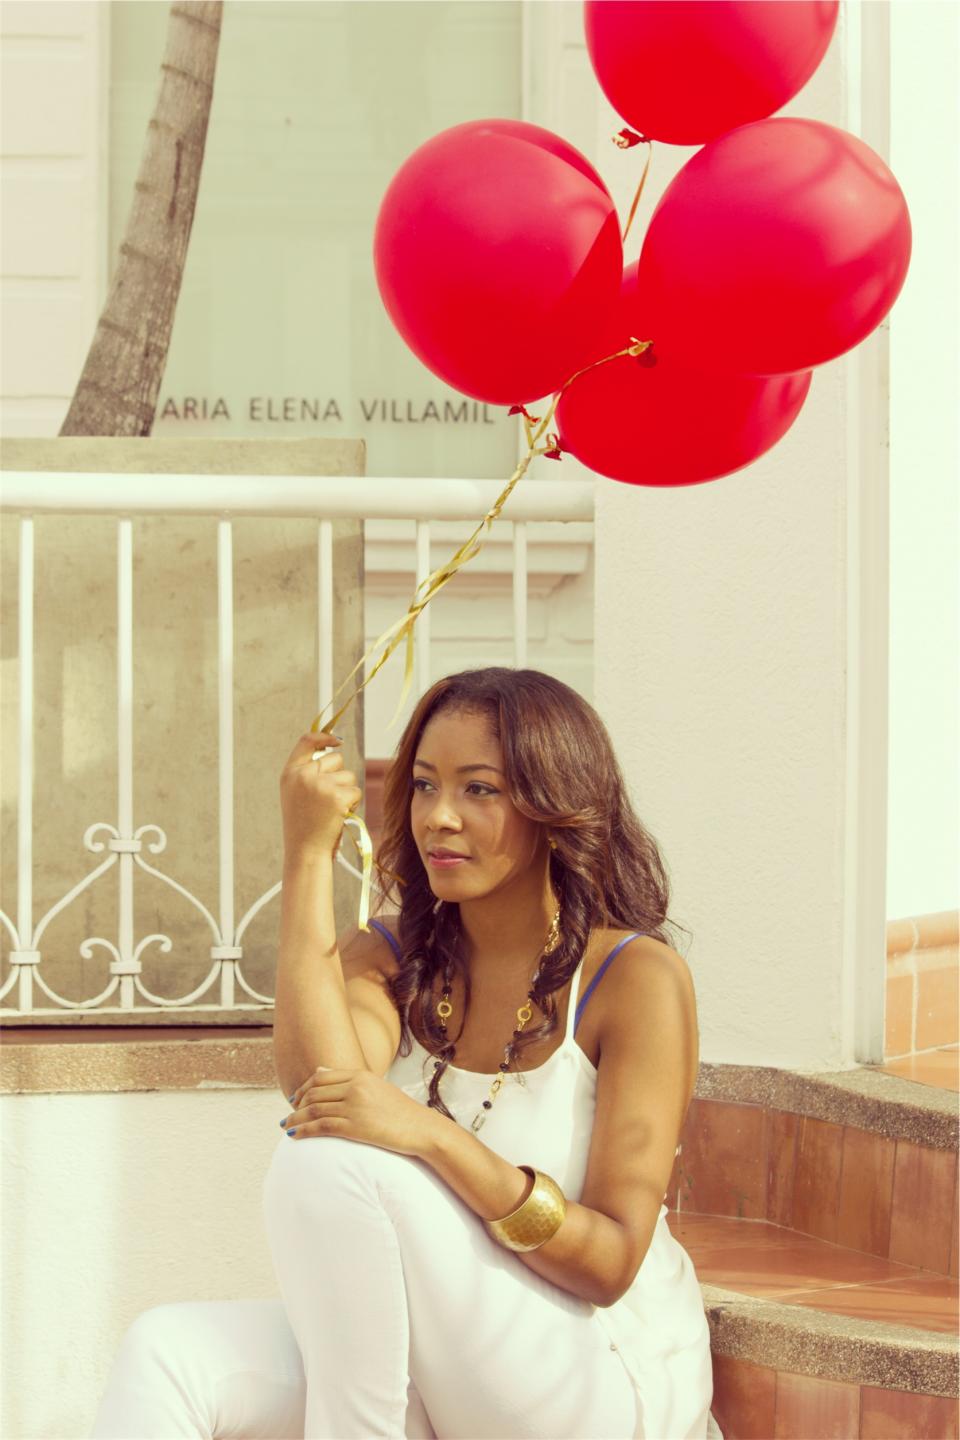 pretty lady with balloon